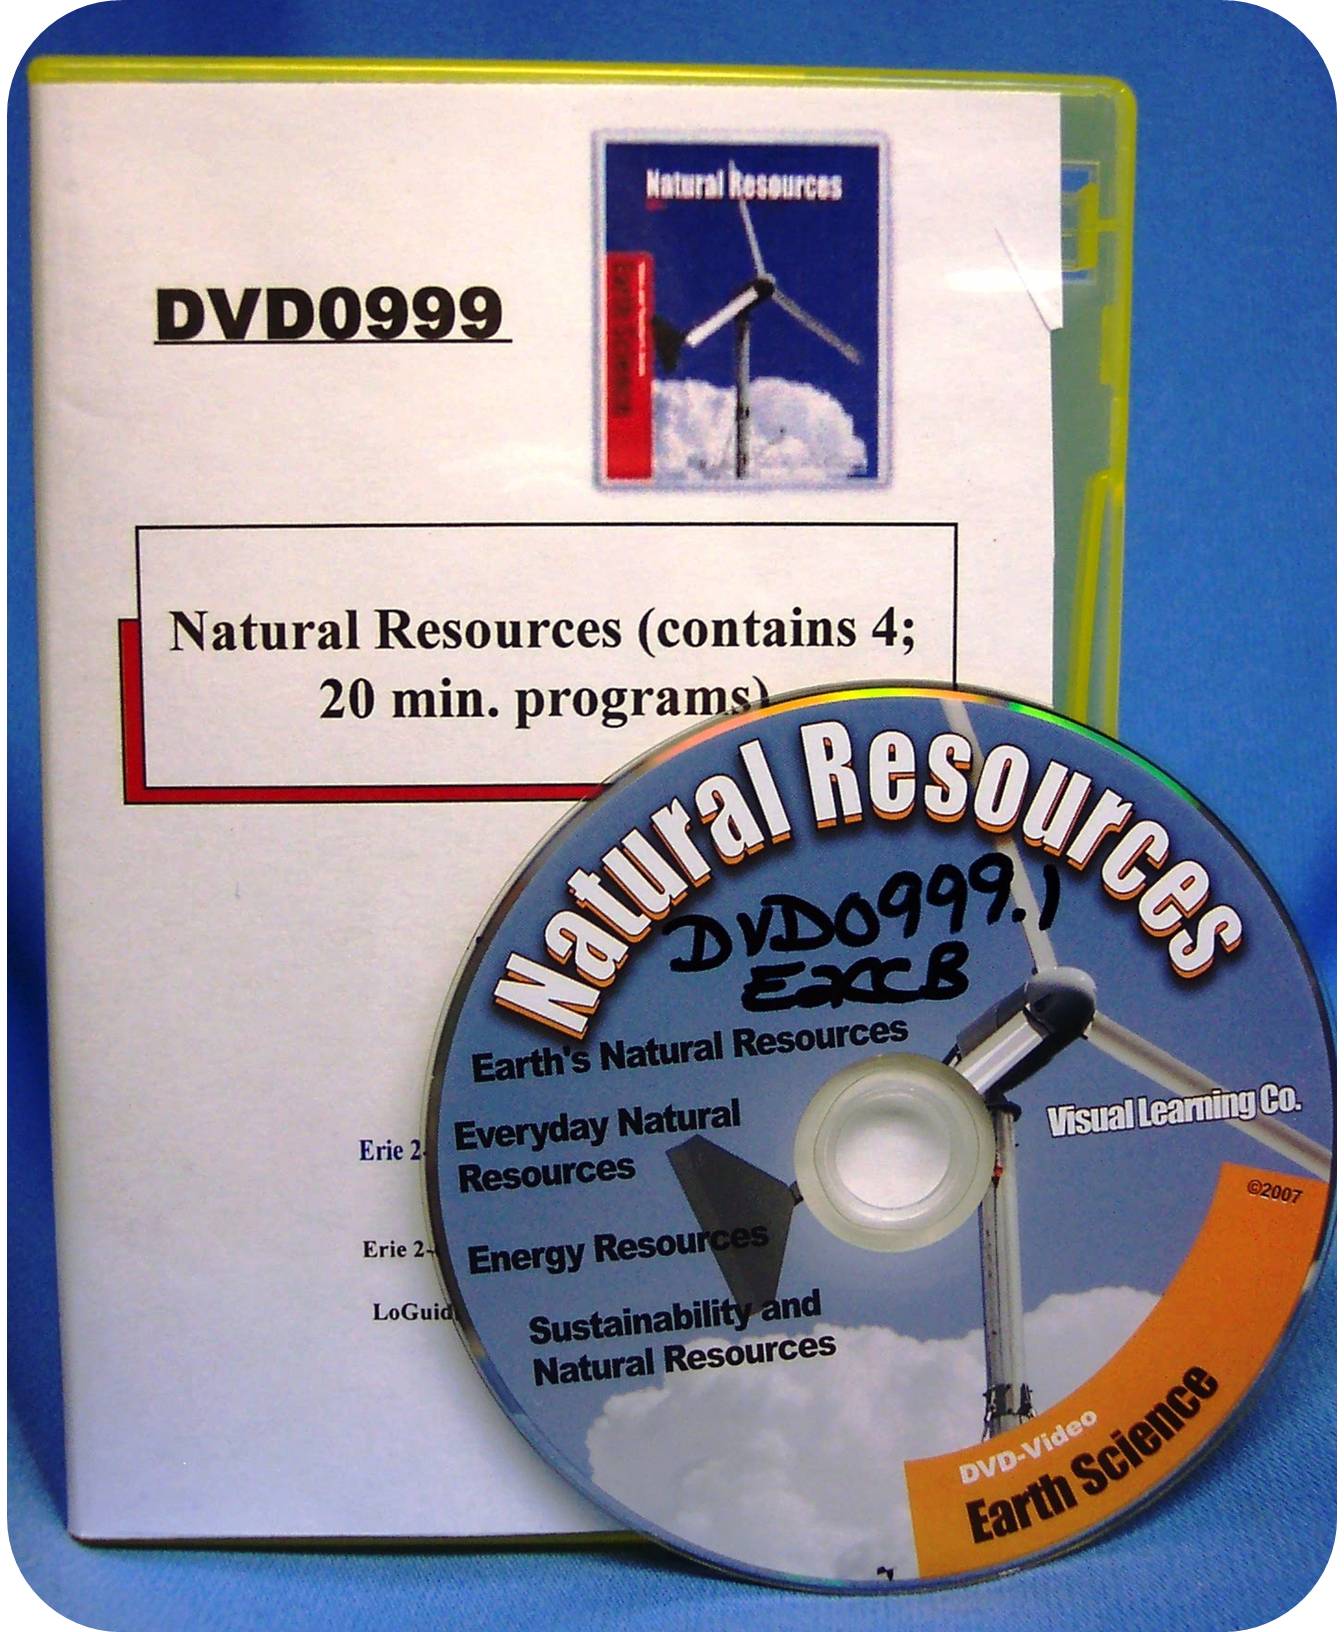 Natural Resources (contains 4; 20 min. programs)